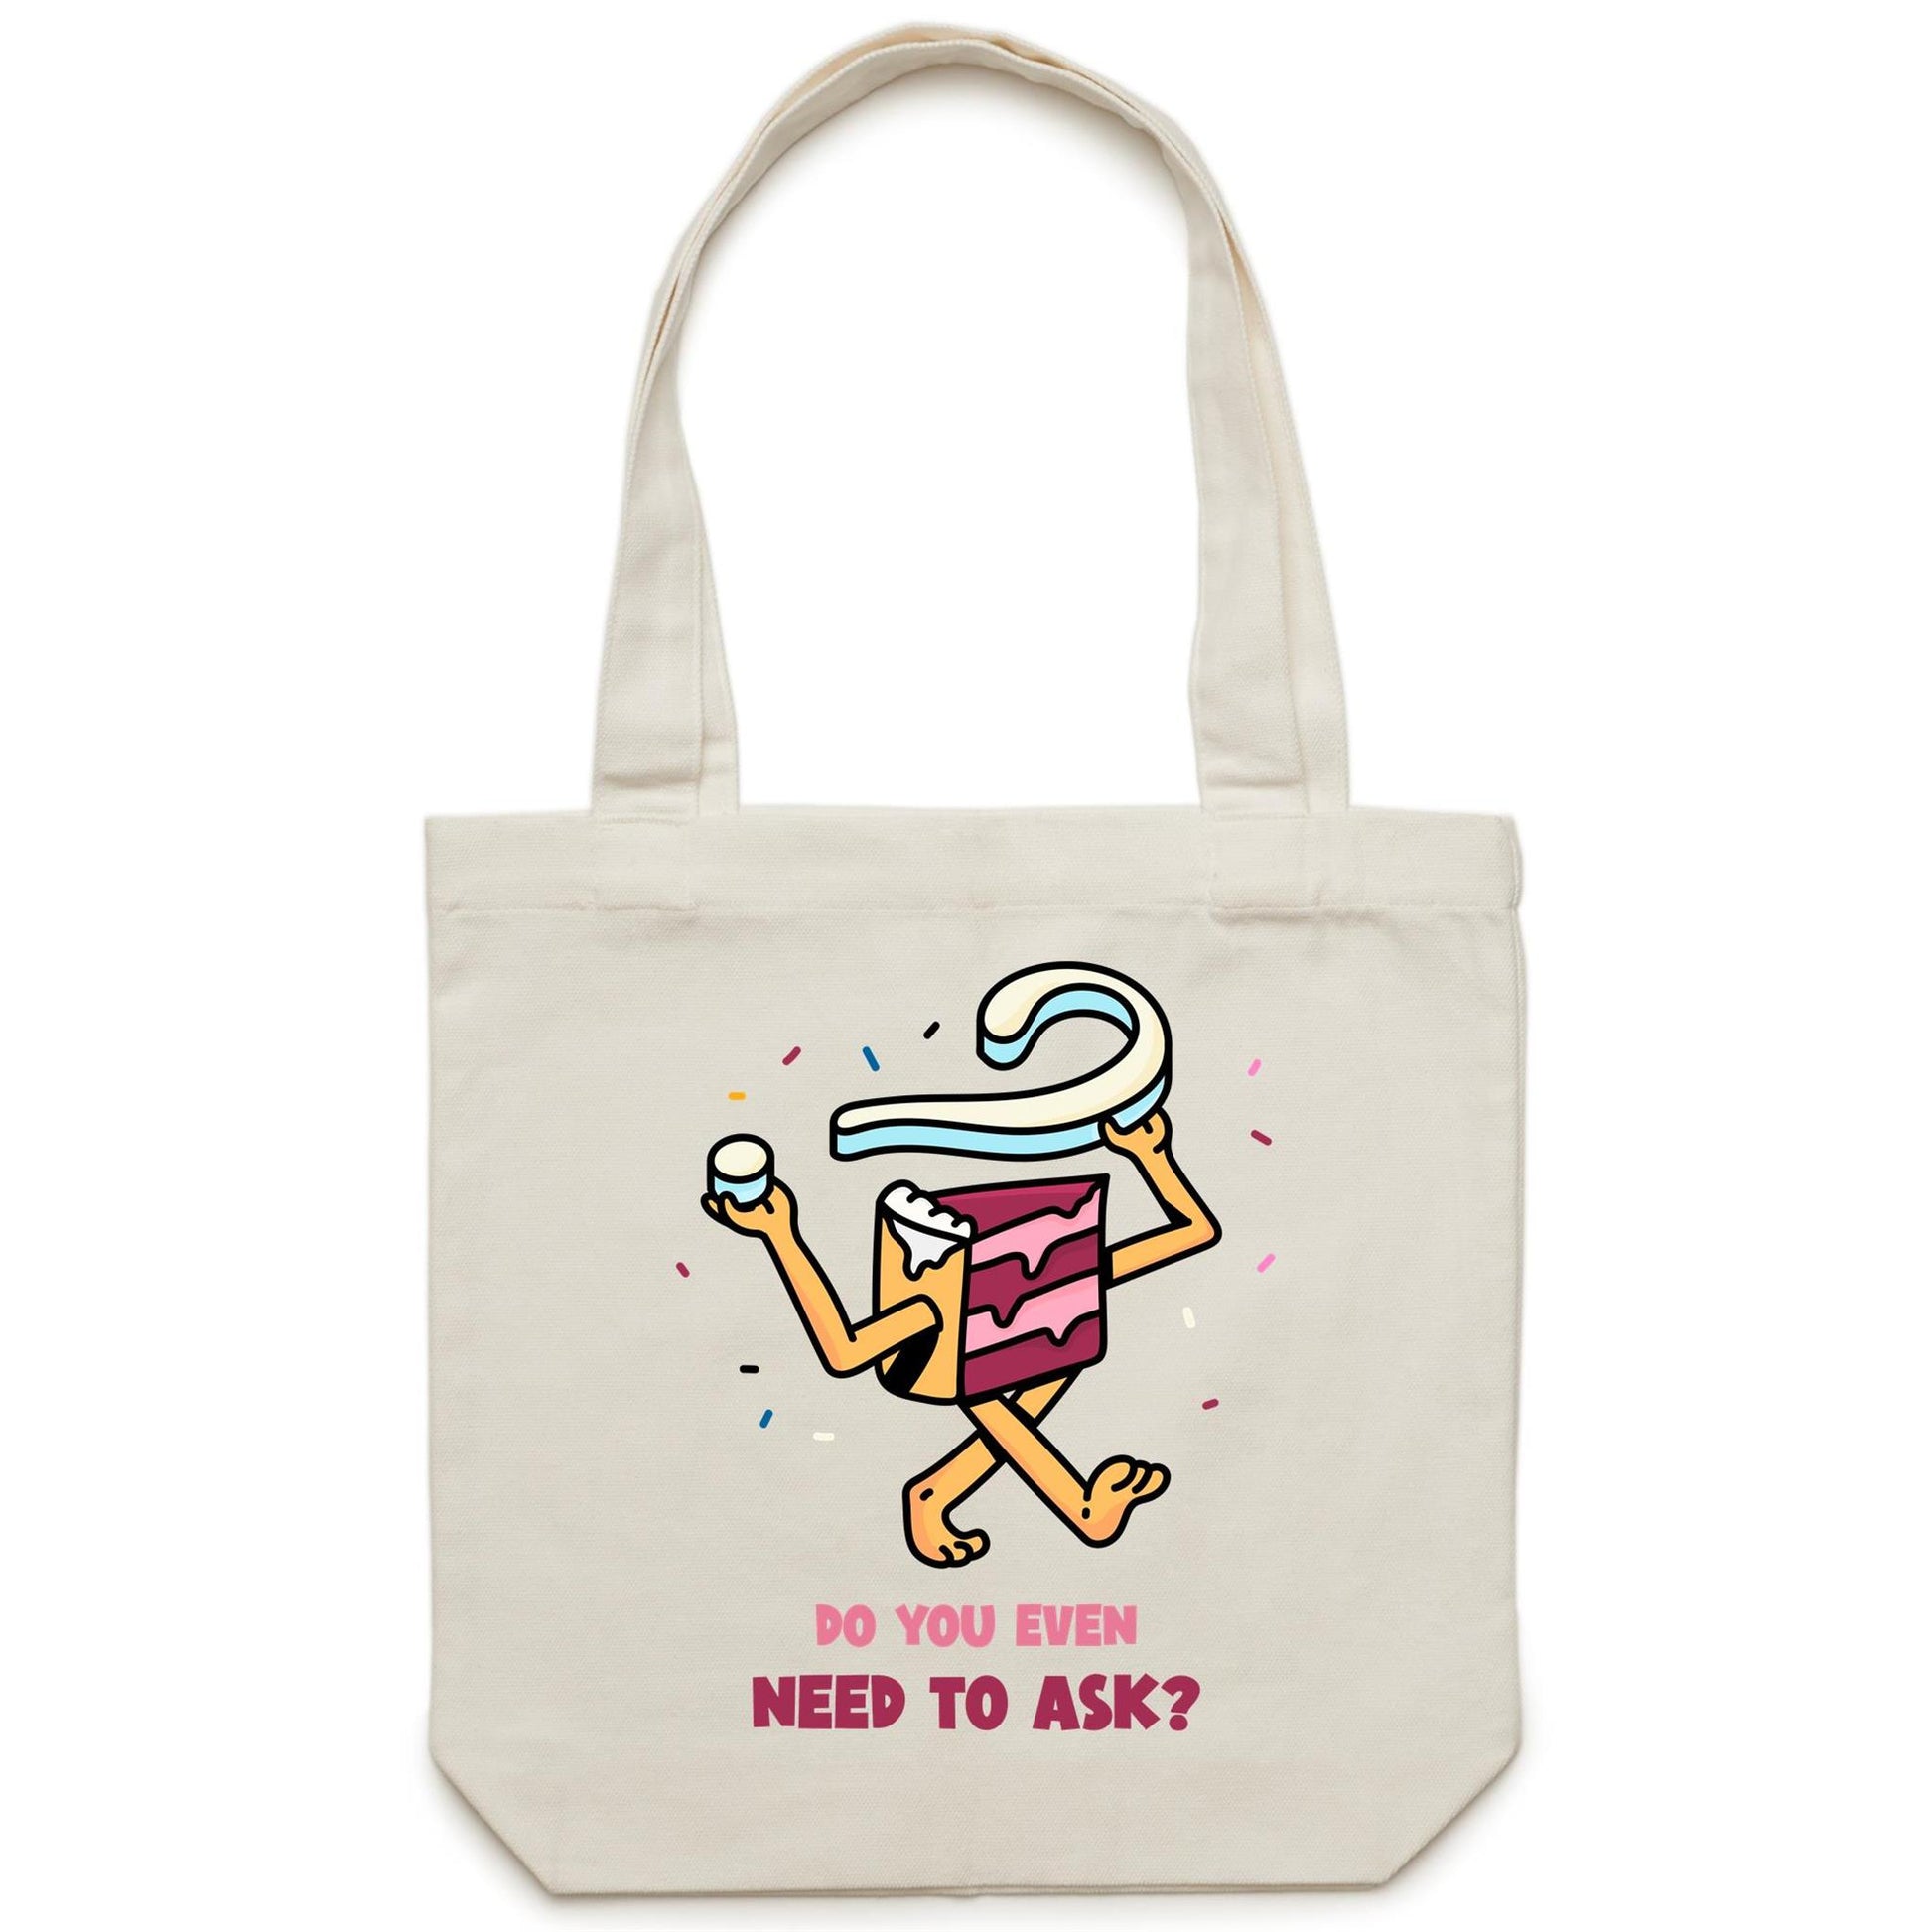 Cake, Do You Even Need To Ask - Canvas Tote Bag Cream One Size Tote Bag Food